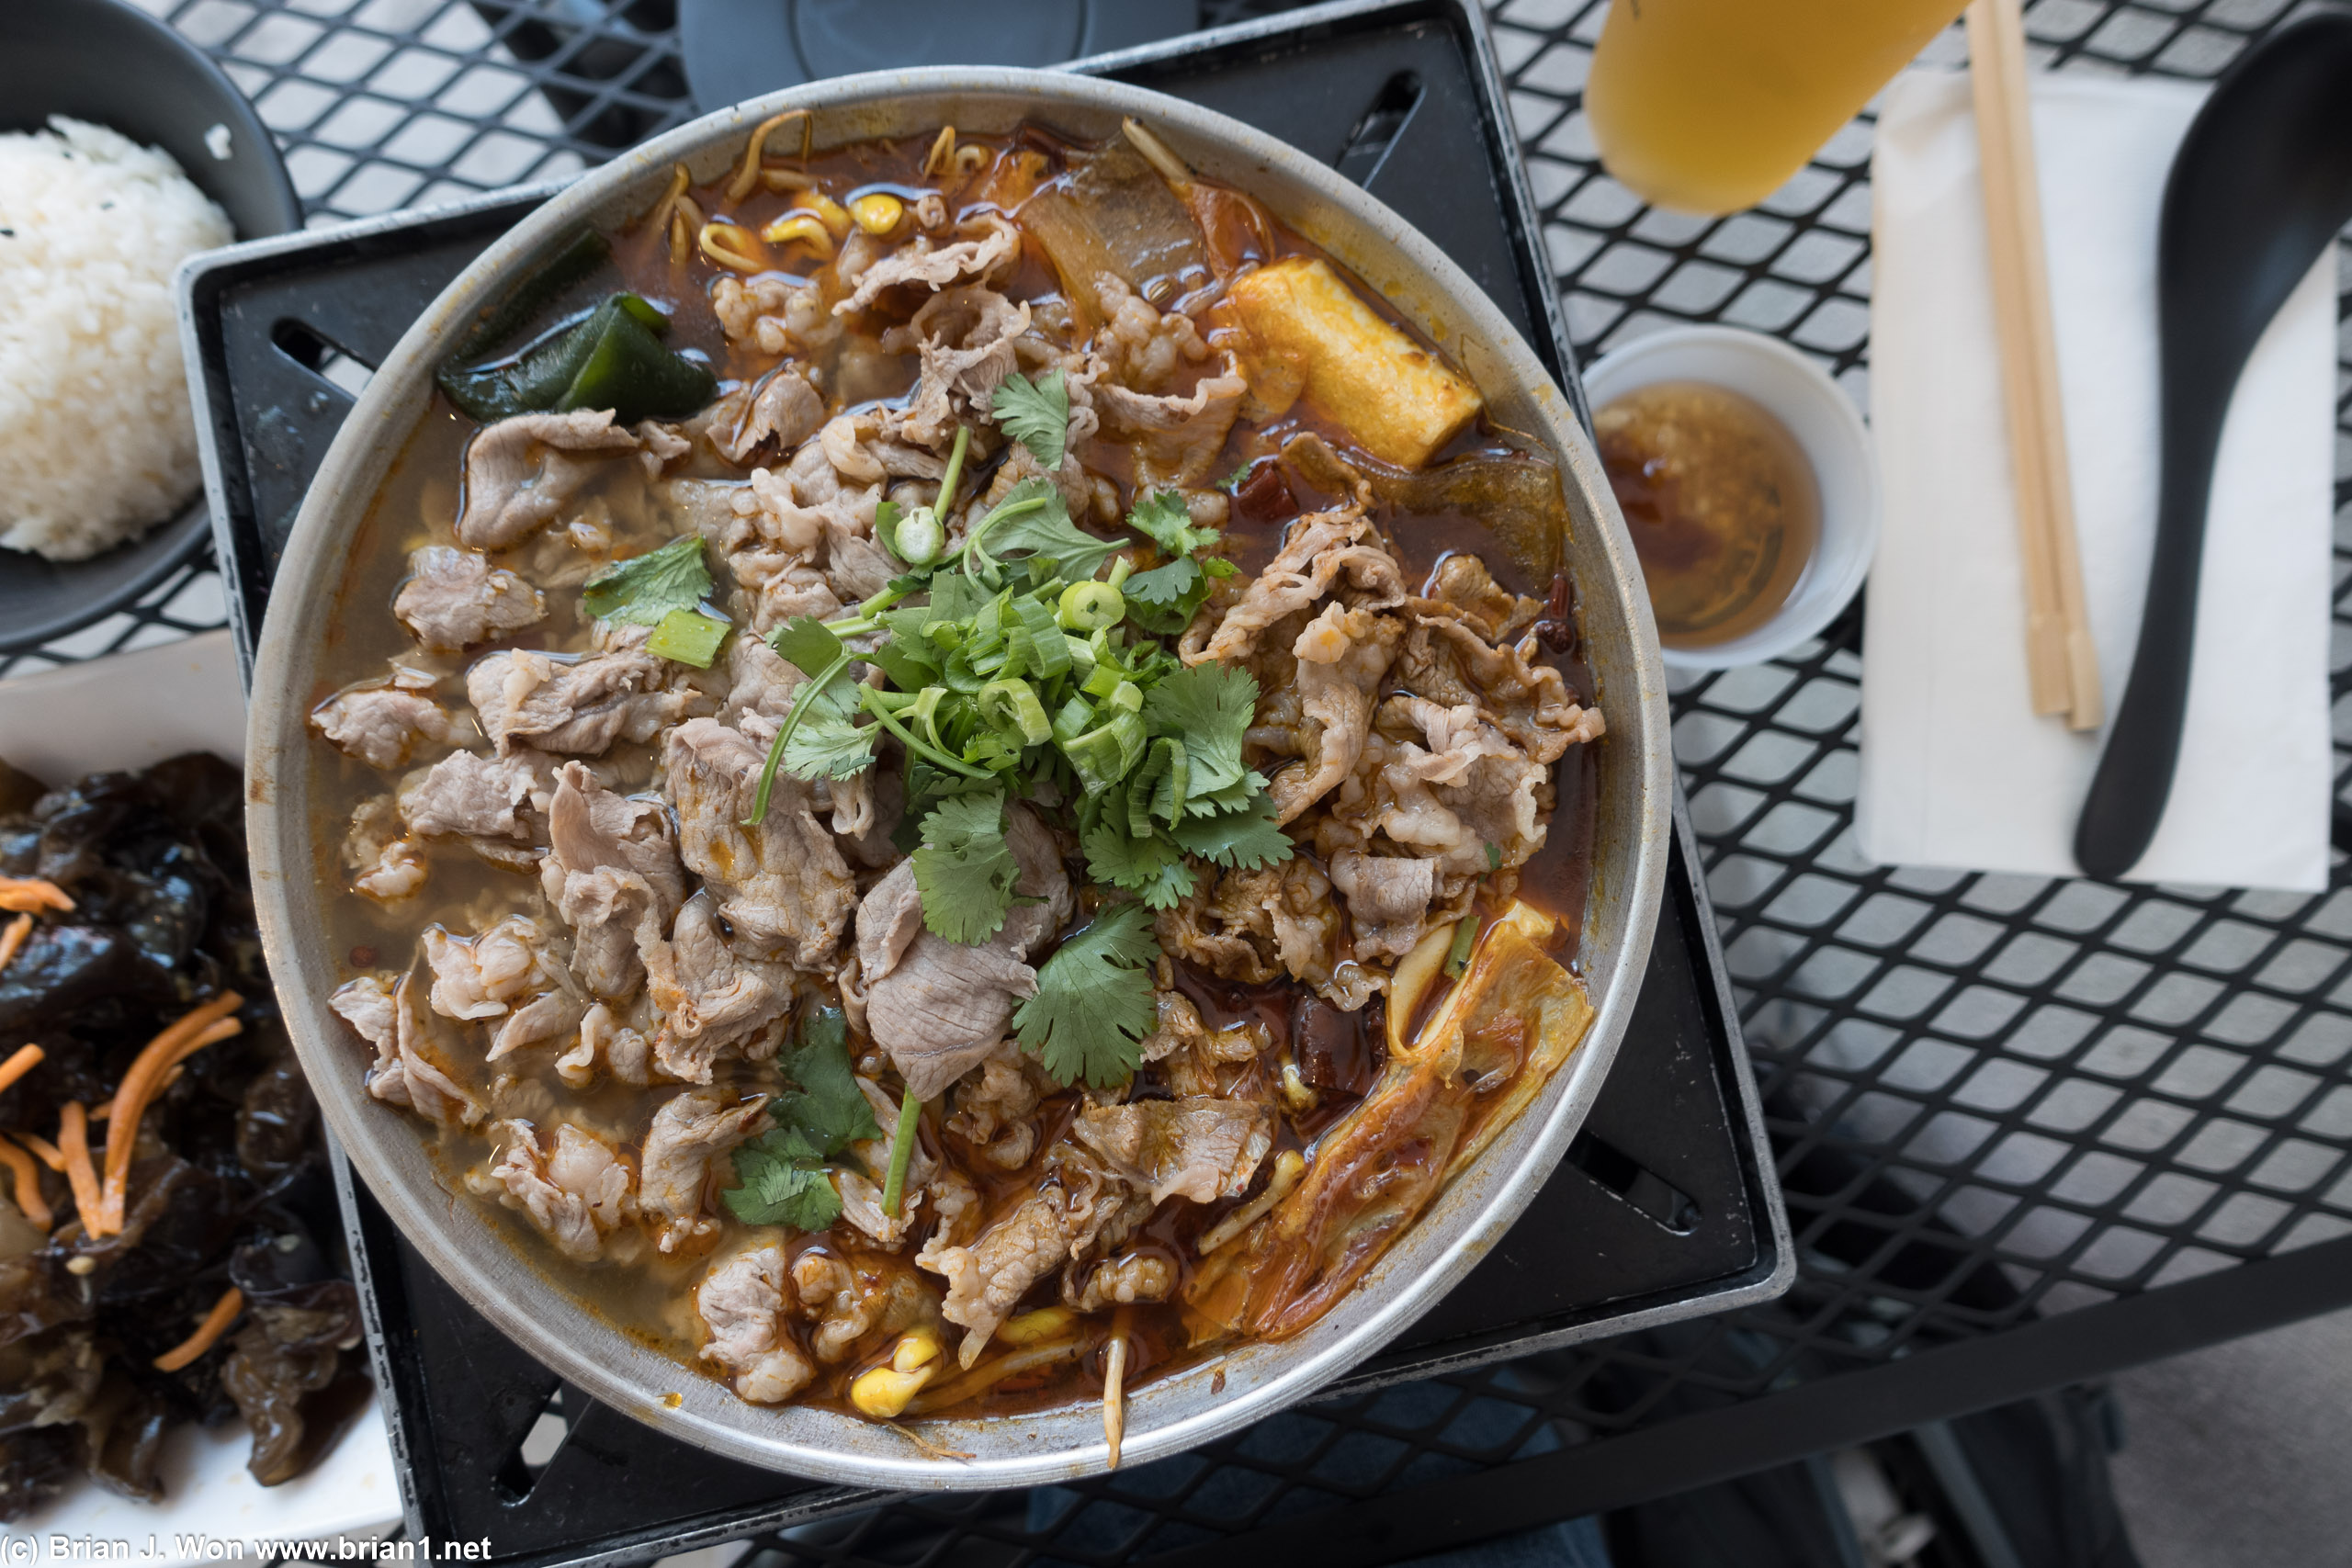 Spicy beef hot pot without any additions seems a little bare vs. before.